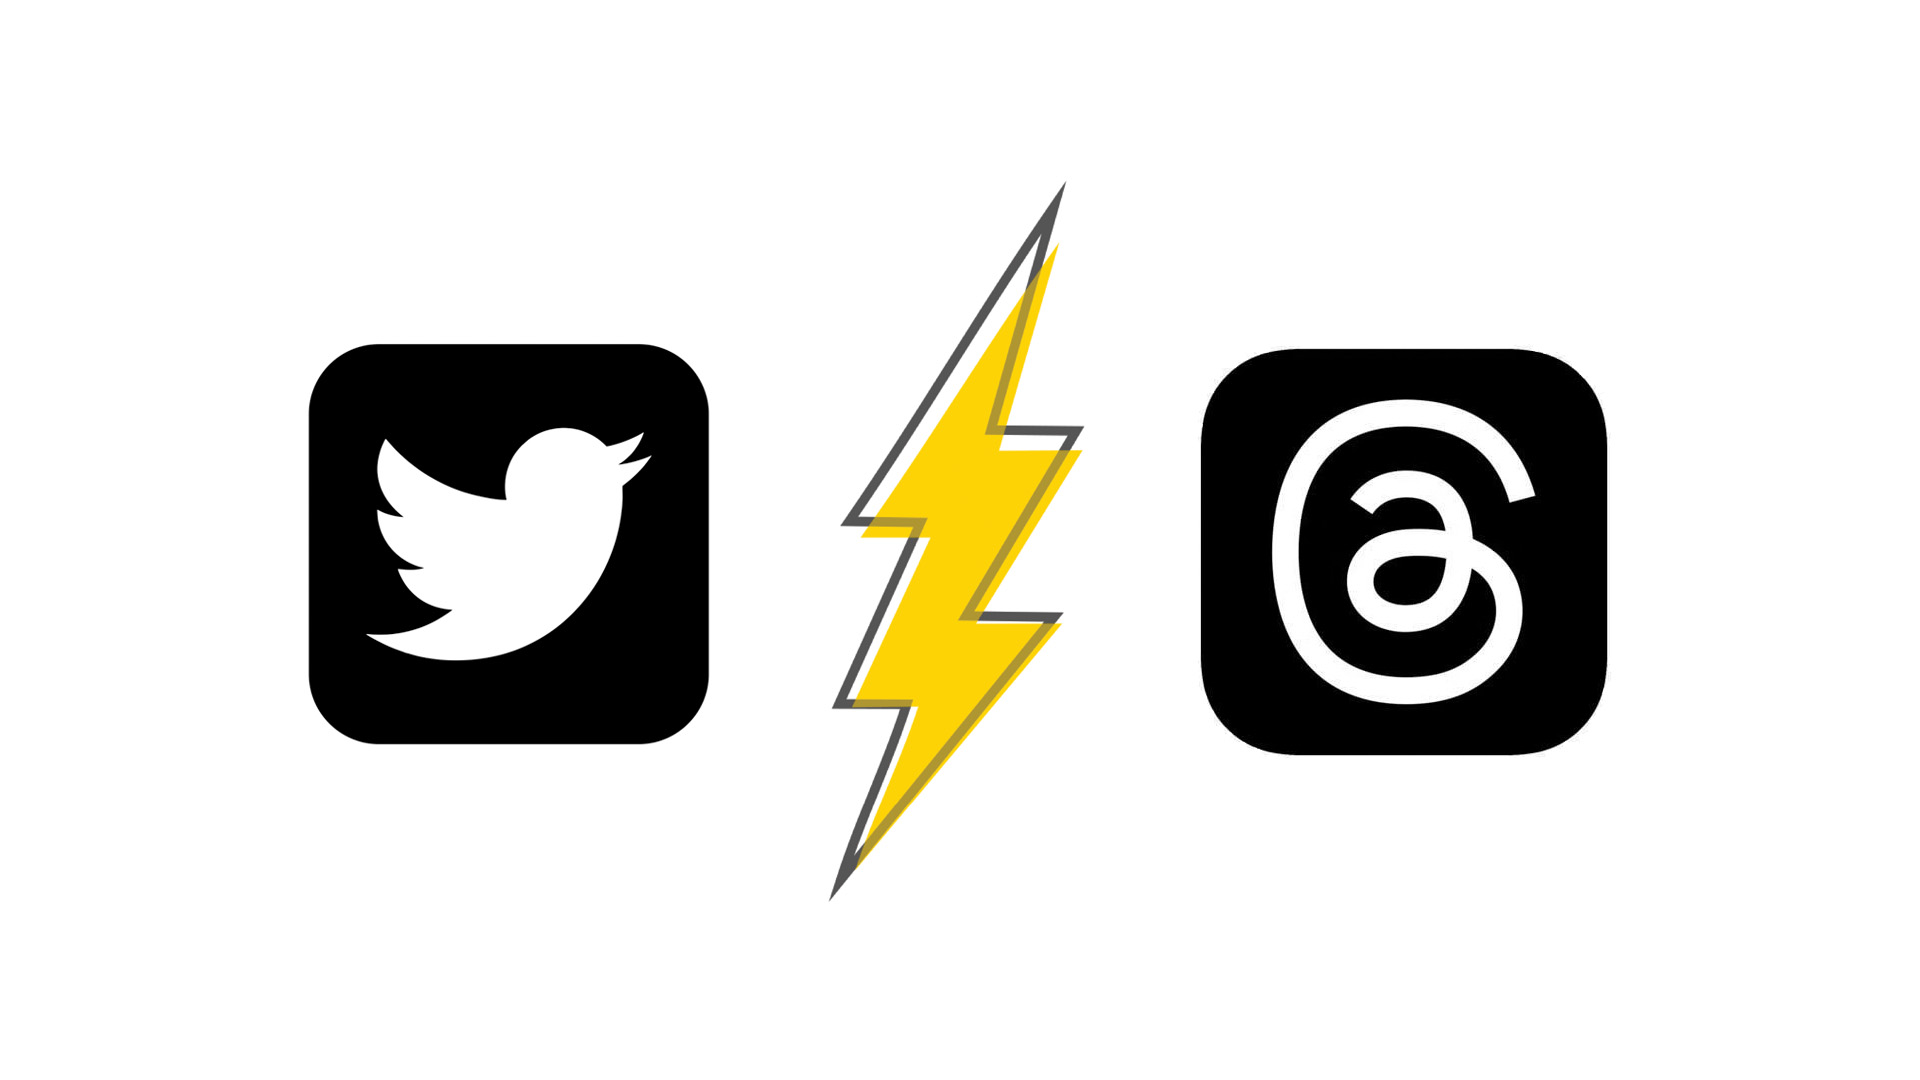 Twitter logo and Threads logo separated by a lightning bolt.